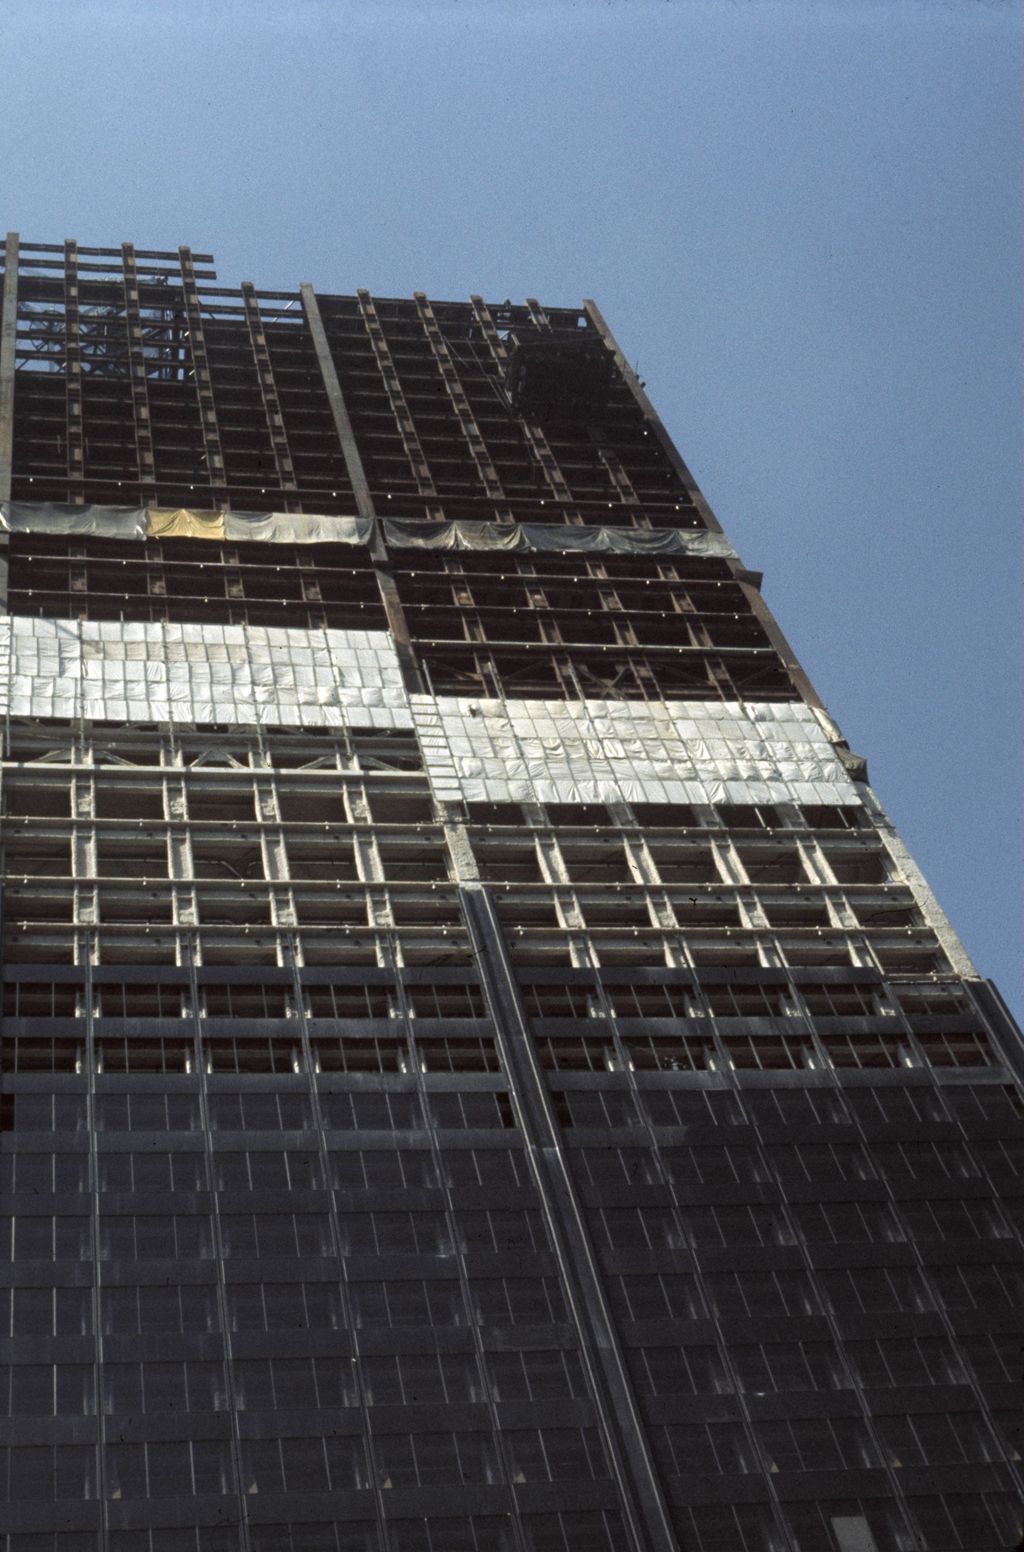 Miniature of Sear Tower during construction